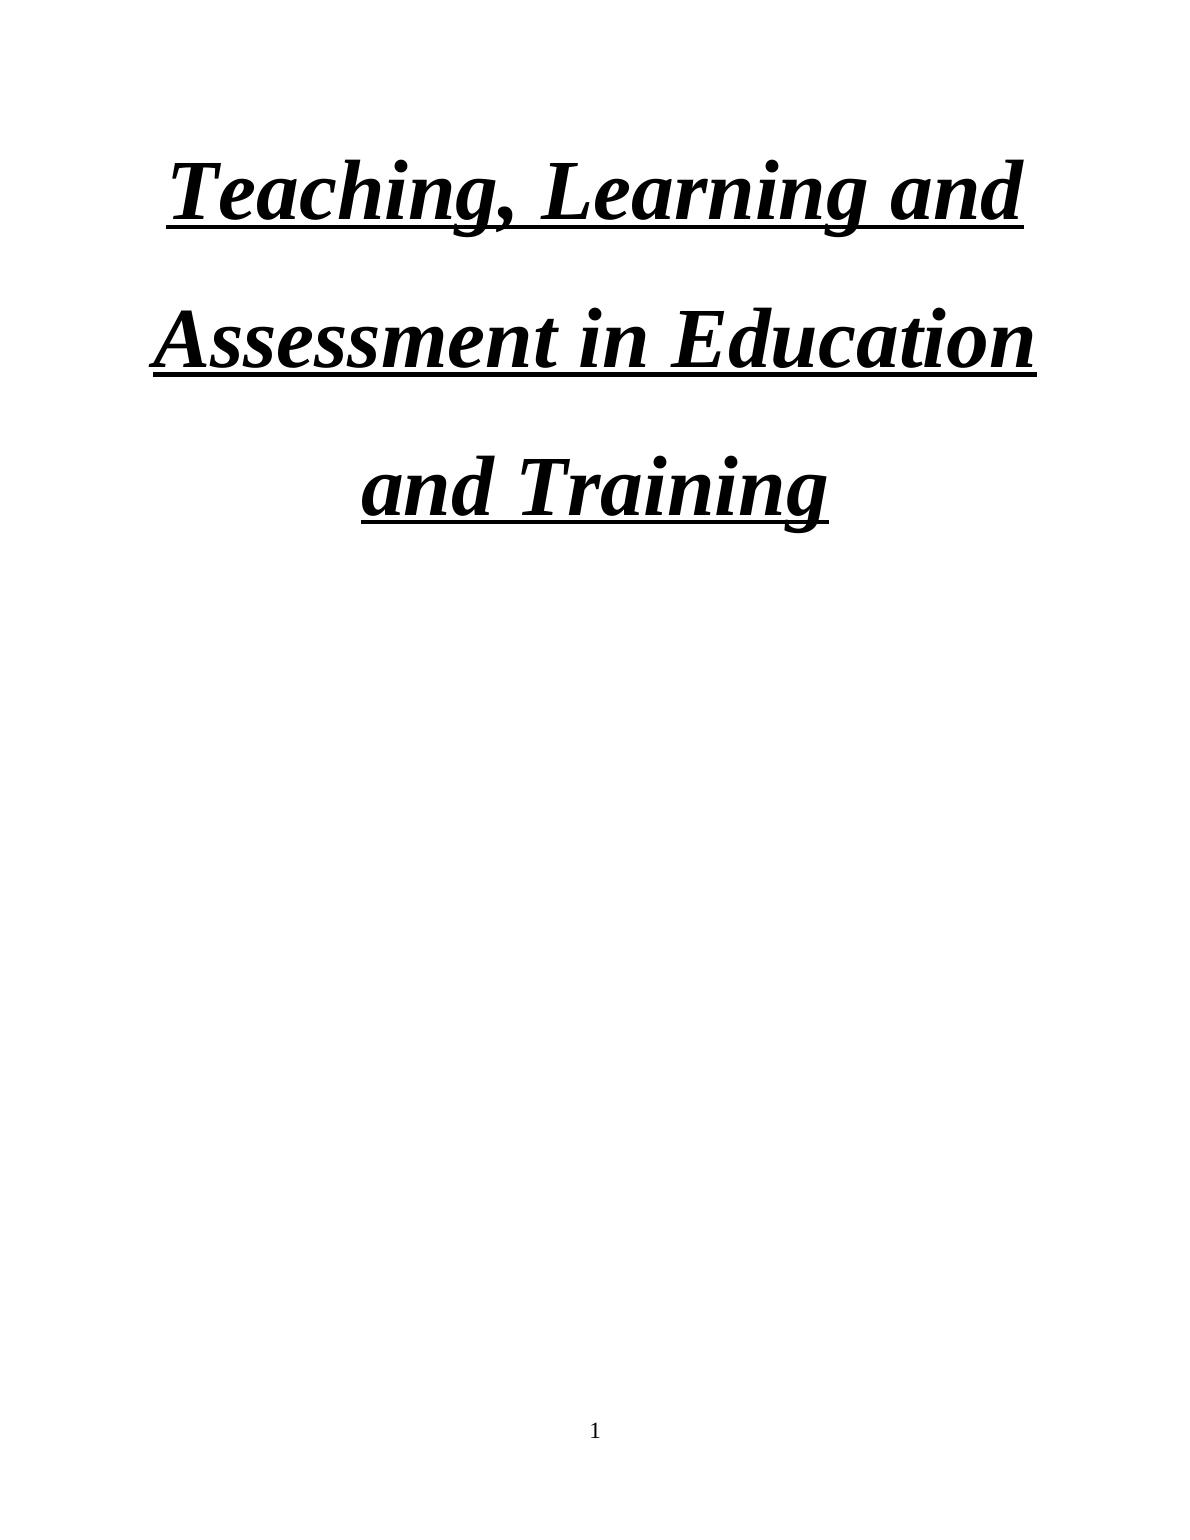 Teaching, learning and assessment in education and training_1